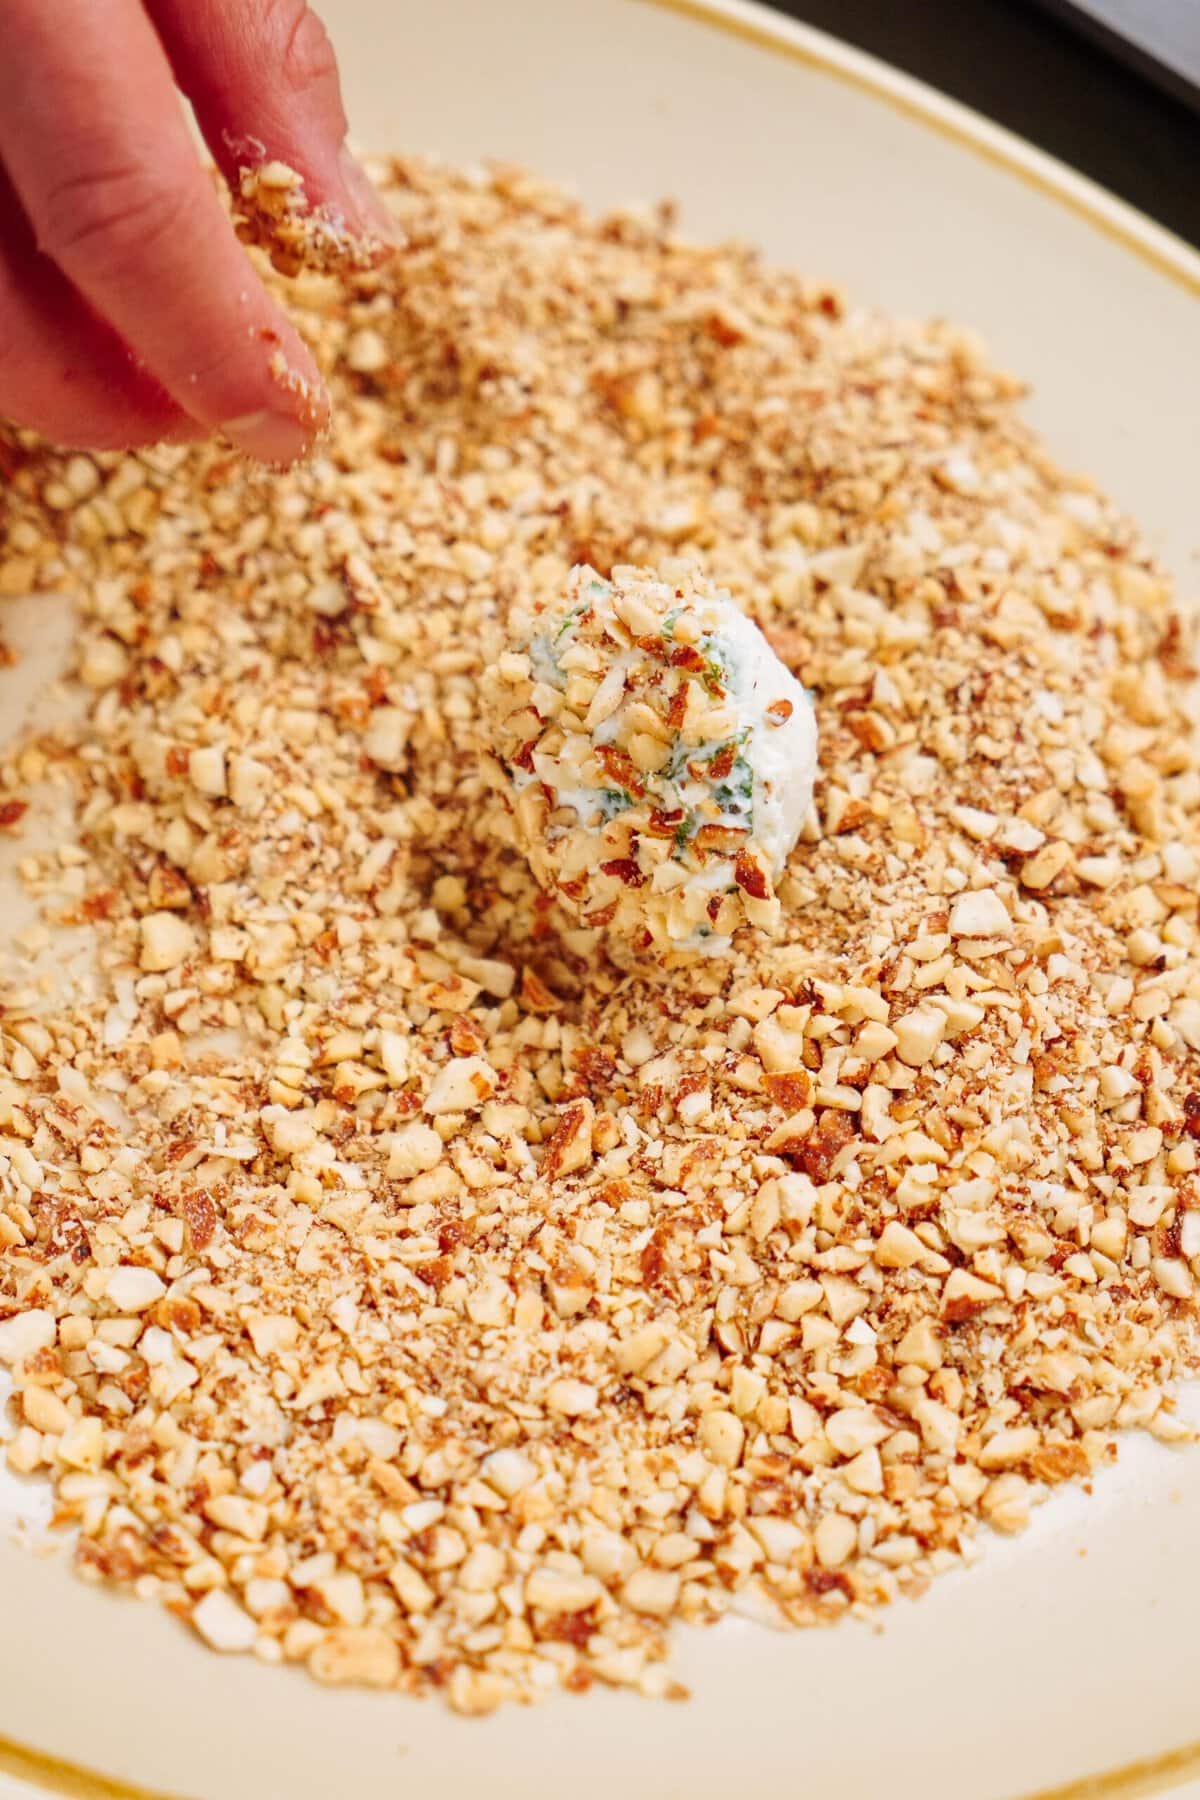 A hand is seen rolling a white, ball-shaped goat cheese truffle in a plate full of crushed nuts and herbs.